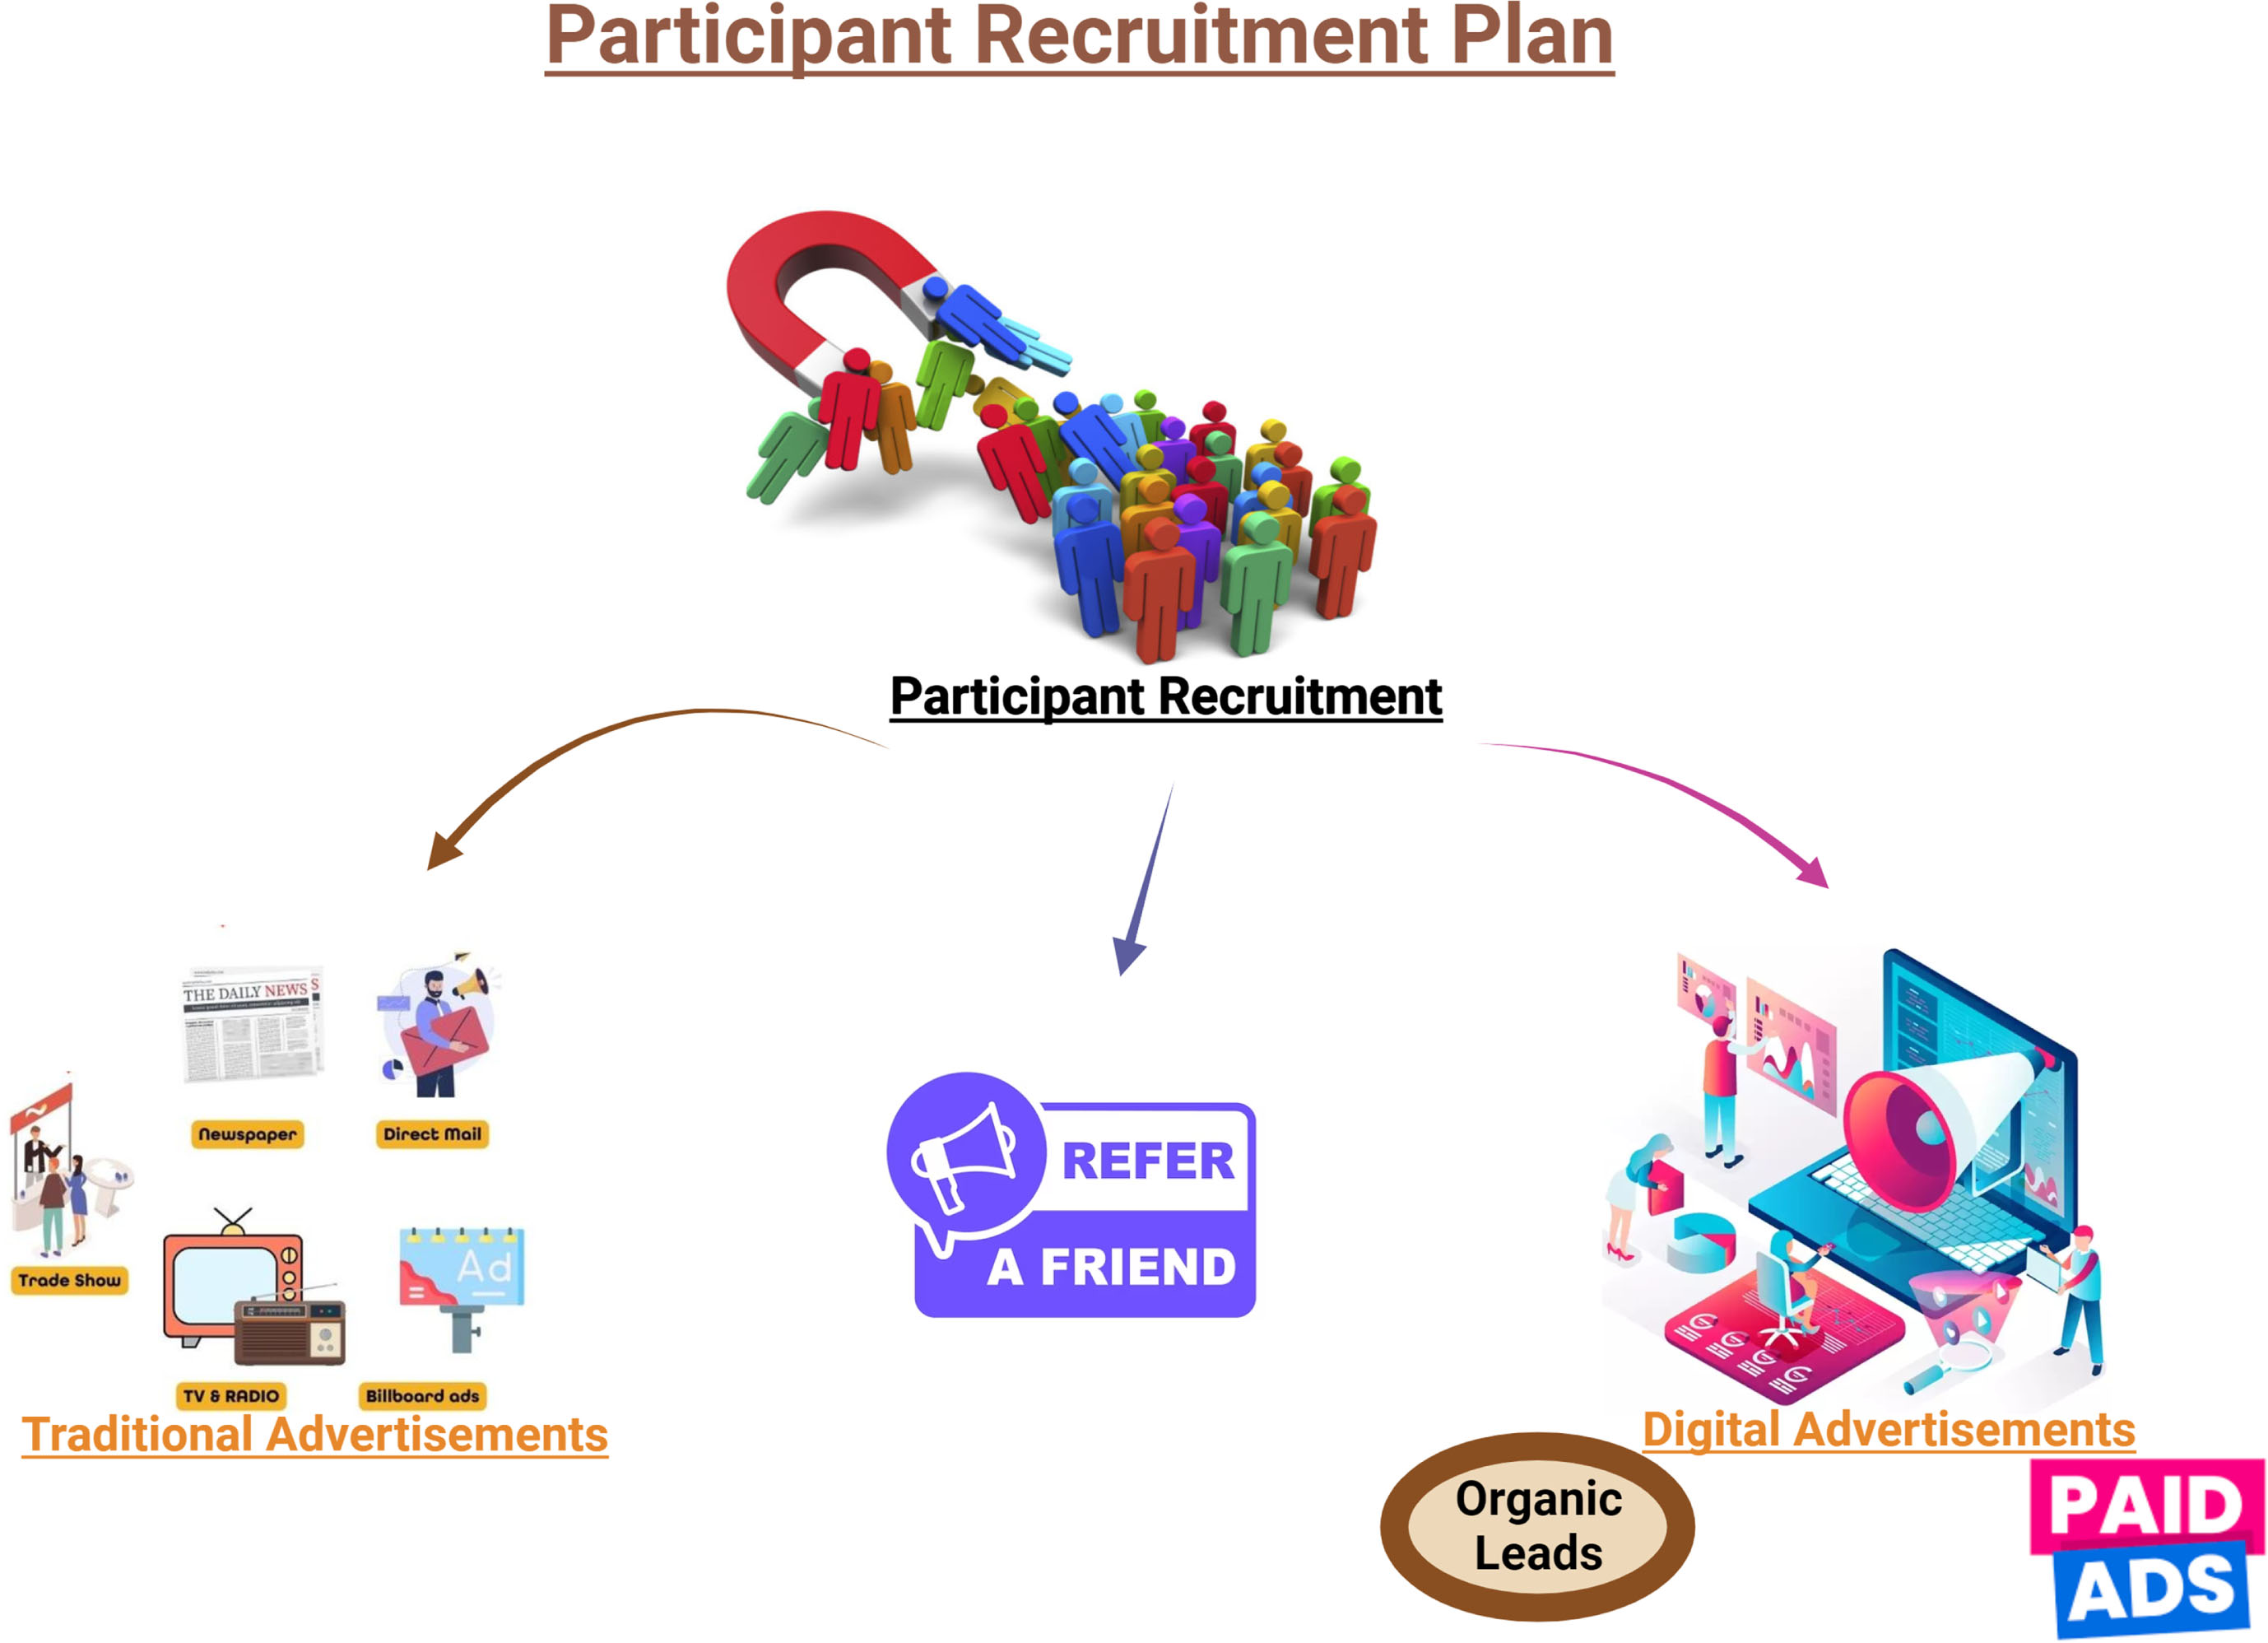 The initial stage of the recruitment planning process. It involves finding people who fit a particular target in the study. There are three primary ways to identify potential recruits. The first method is through personal referrals, where individuals refer friends, colleagues, or acquaintances who they believe would be suitable for the study. This approach often proves effective as it leverages existing relationships and trust. The second method involves traditional advertisements, which are typically disseminated through print media, job boards, or other conventional channels. These advertisements help reach a wider audience and attract individuals who may not have direct connections to our organization. Lastly, digital advertisements have emerged as a valuable tool in recruitment planning. Through various online platforms, such as social media, search engines, or specialized job portals, we can target specific demographics and reach a larger pool of potential candidates.